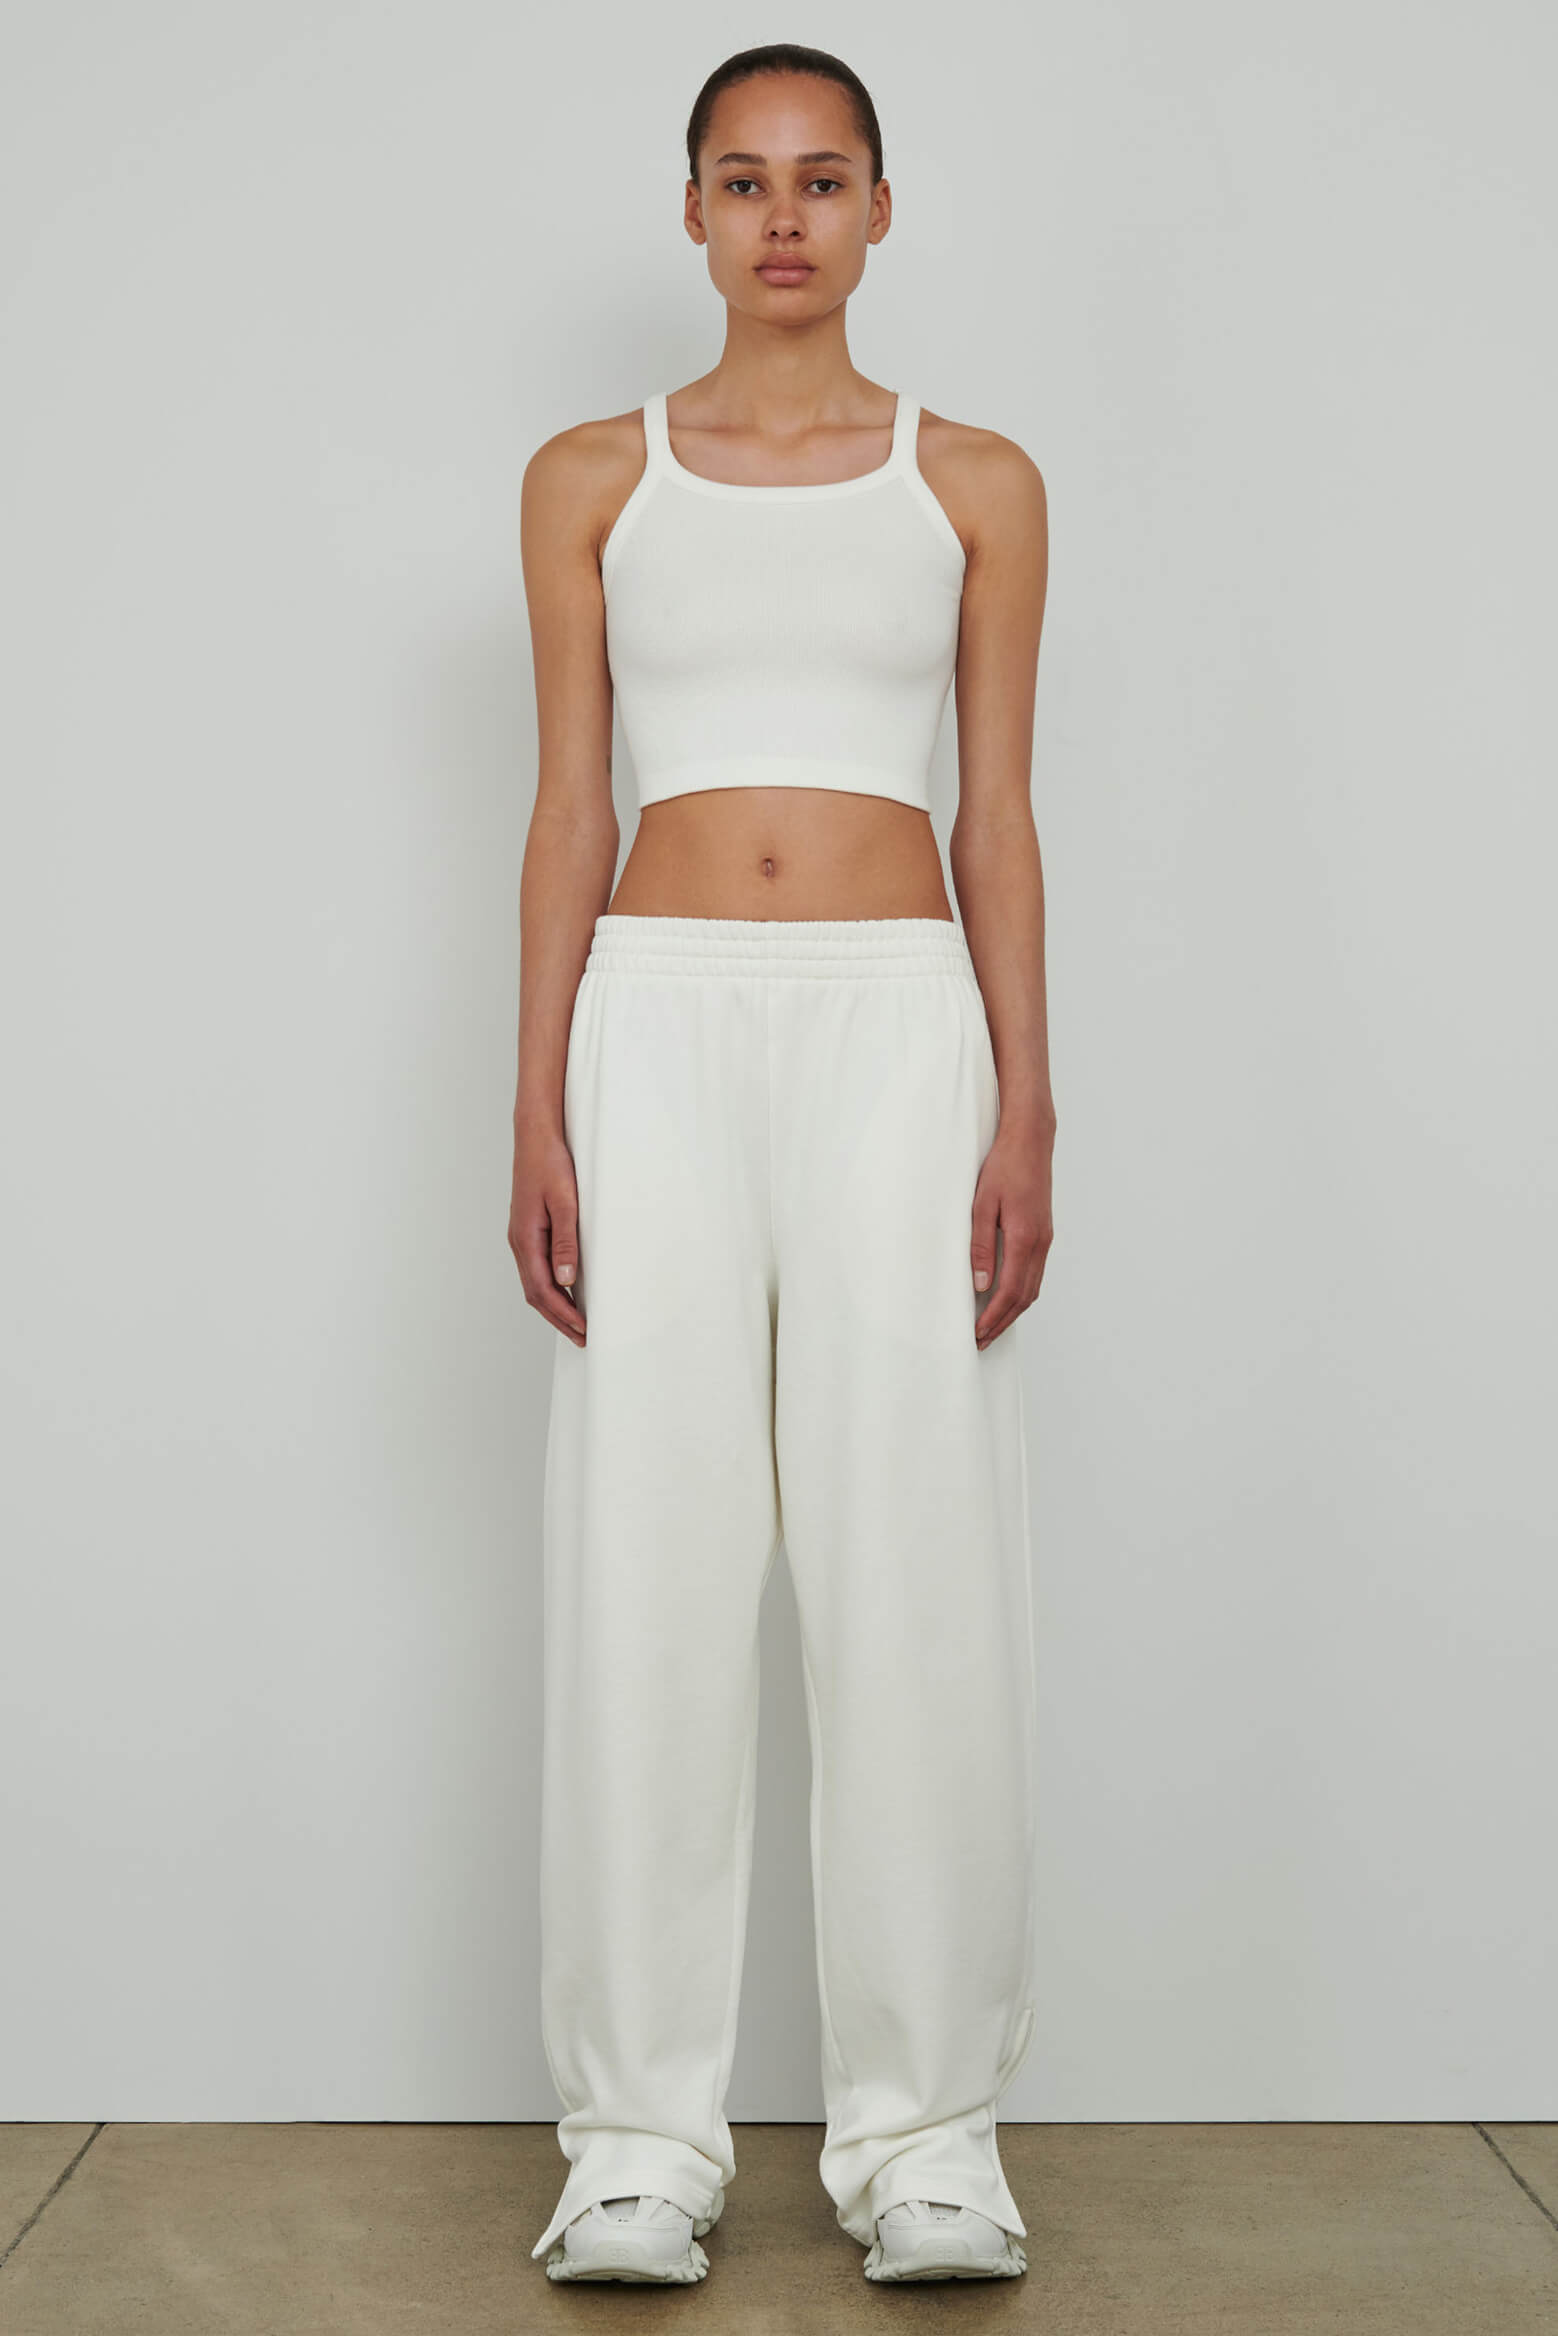 The Wardrobe NYC HB Ribbed Tank in Off White available at The New Trend Australia